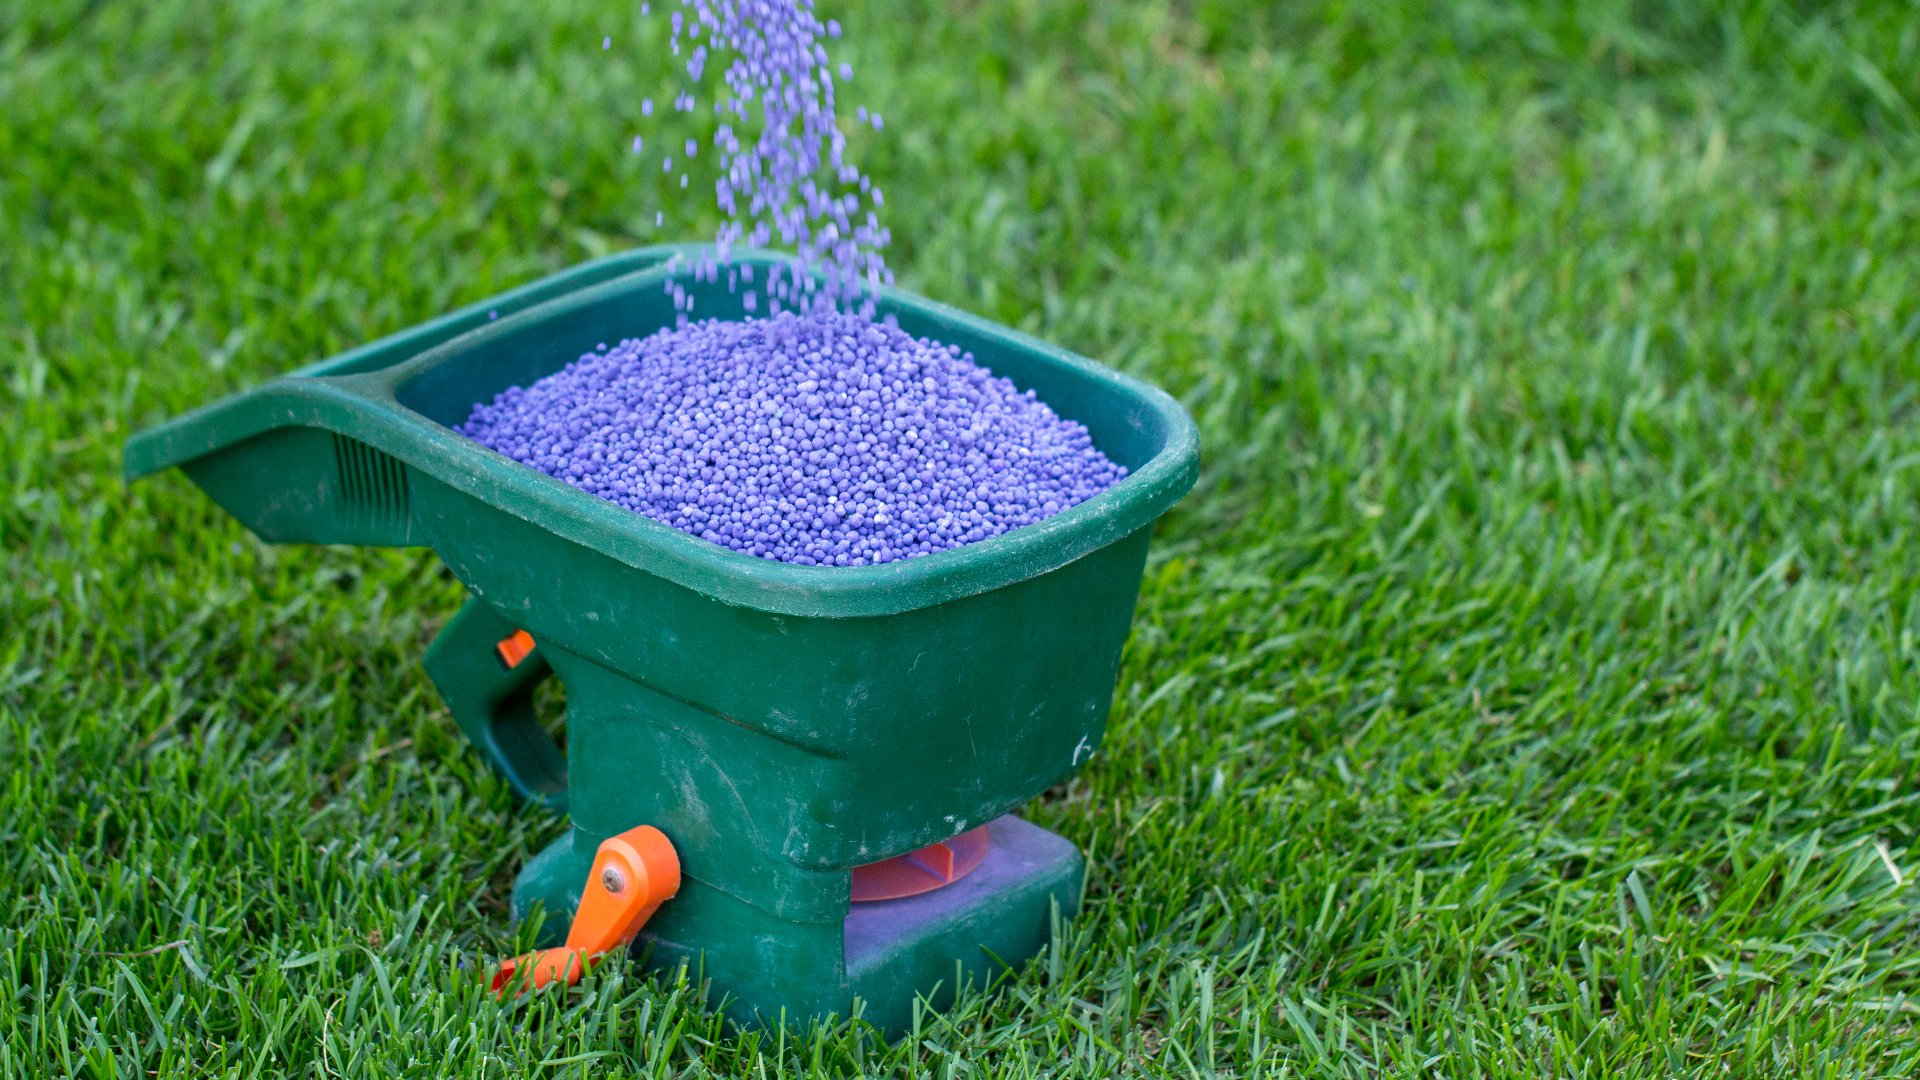 What Can Happen If You Use Too Much Fertilizer on Your Lawn?